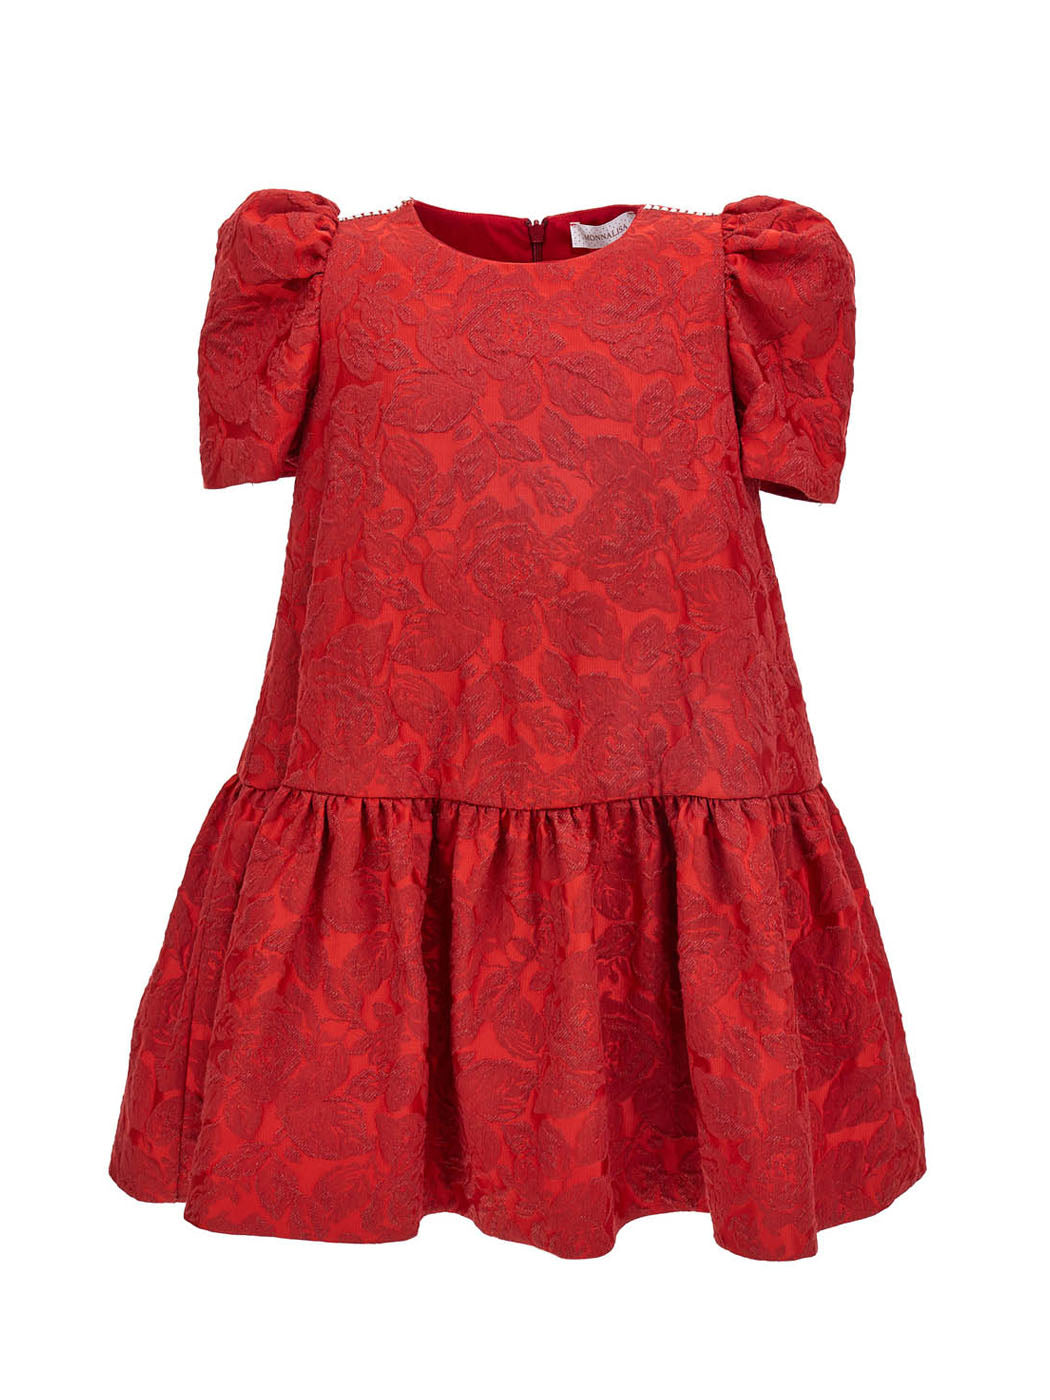 Children's Clothing - special offers-Girl